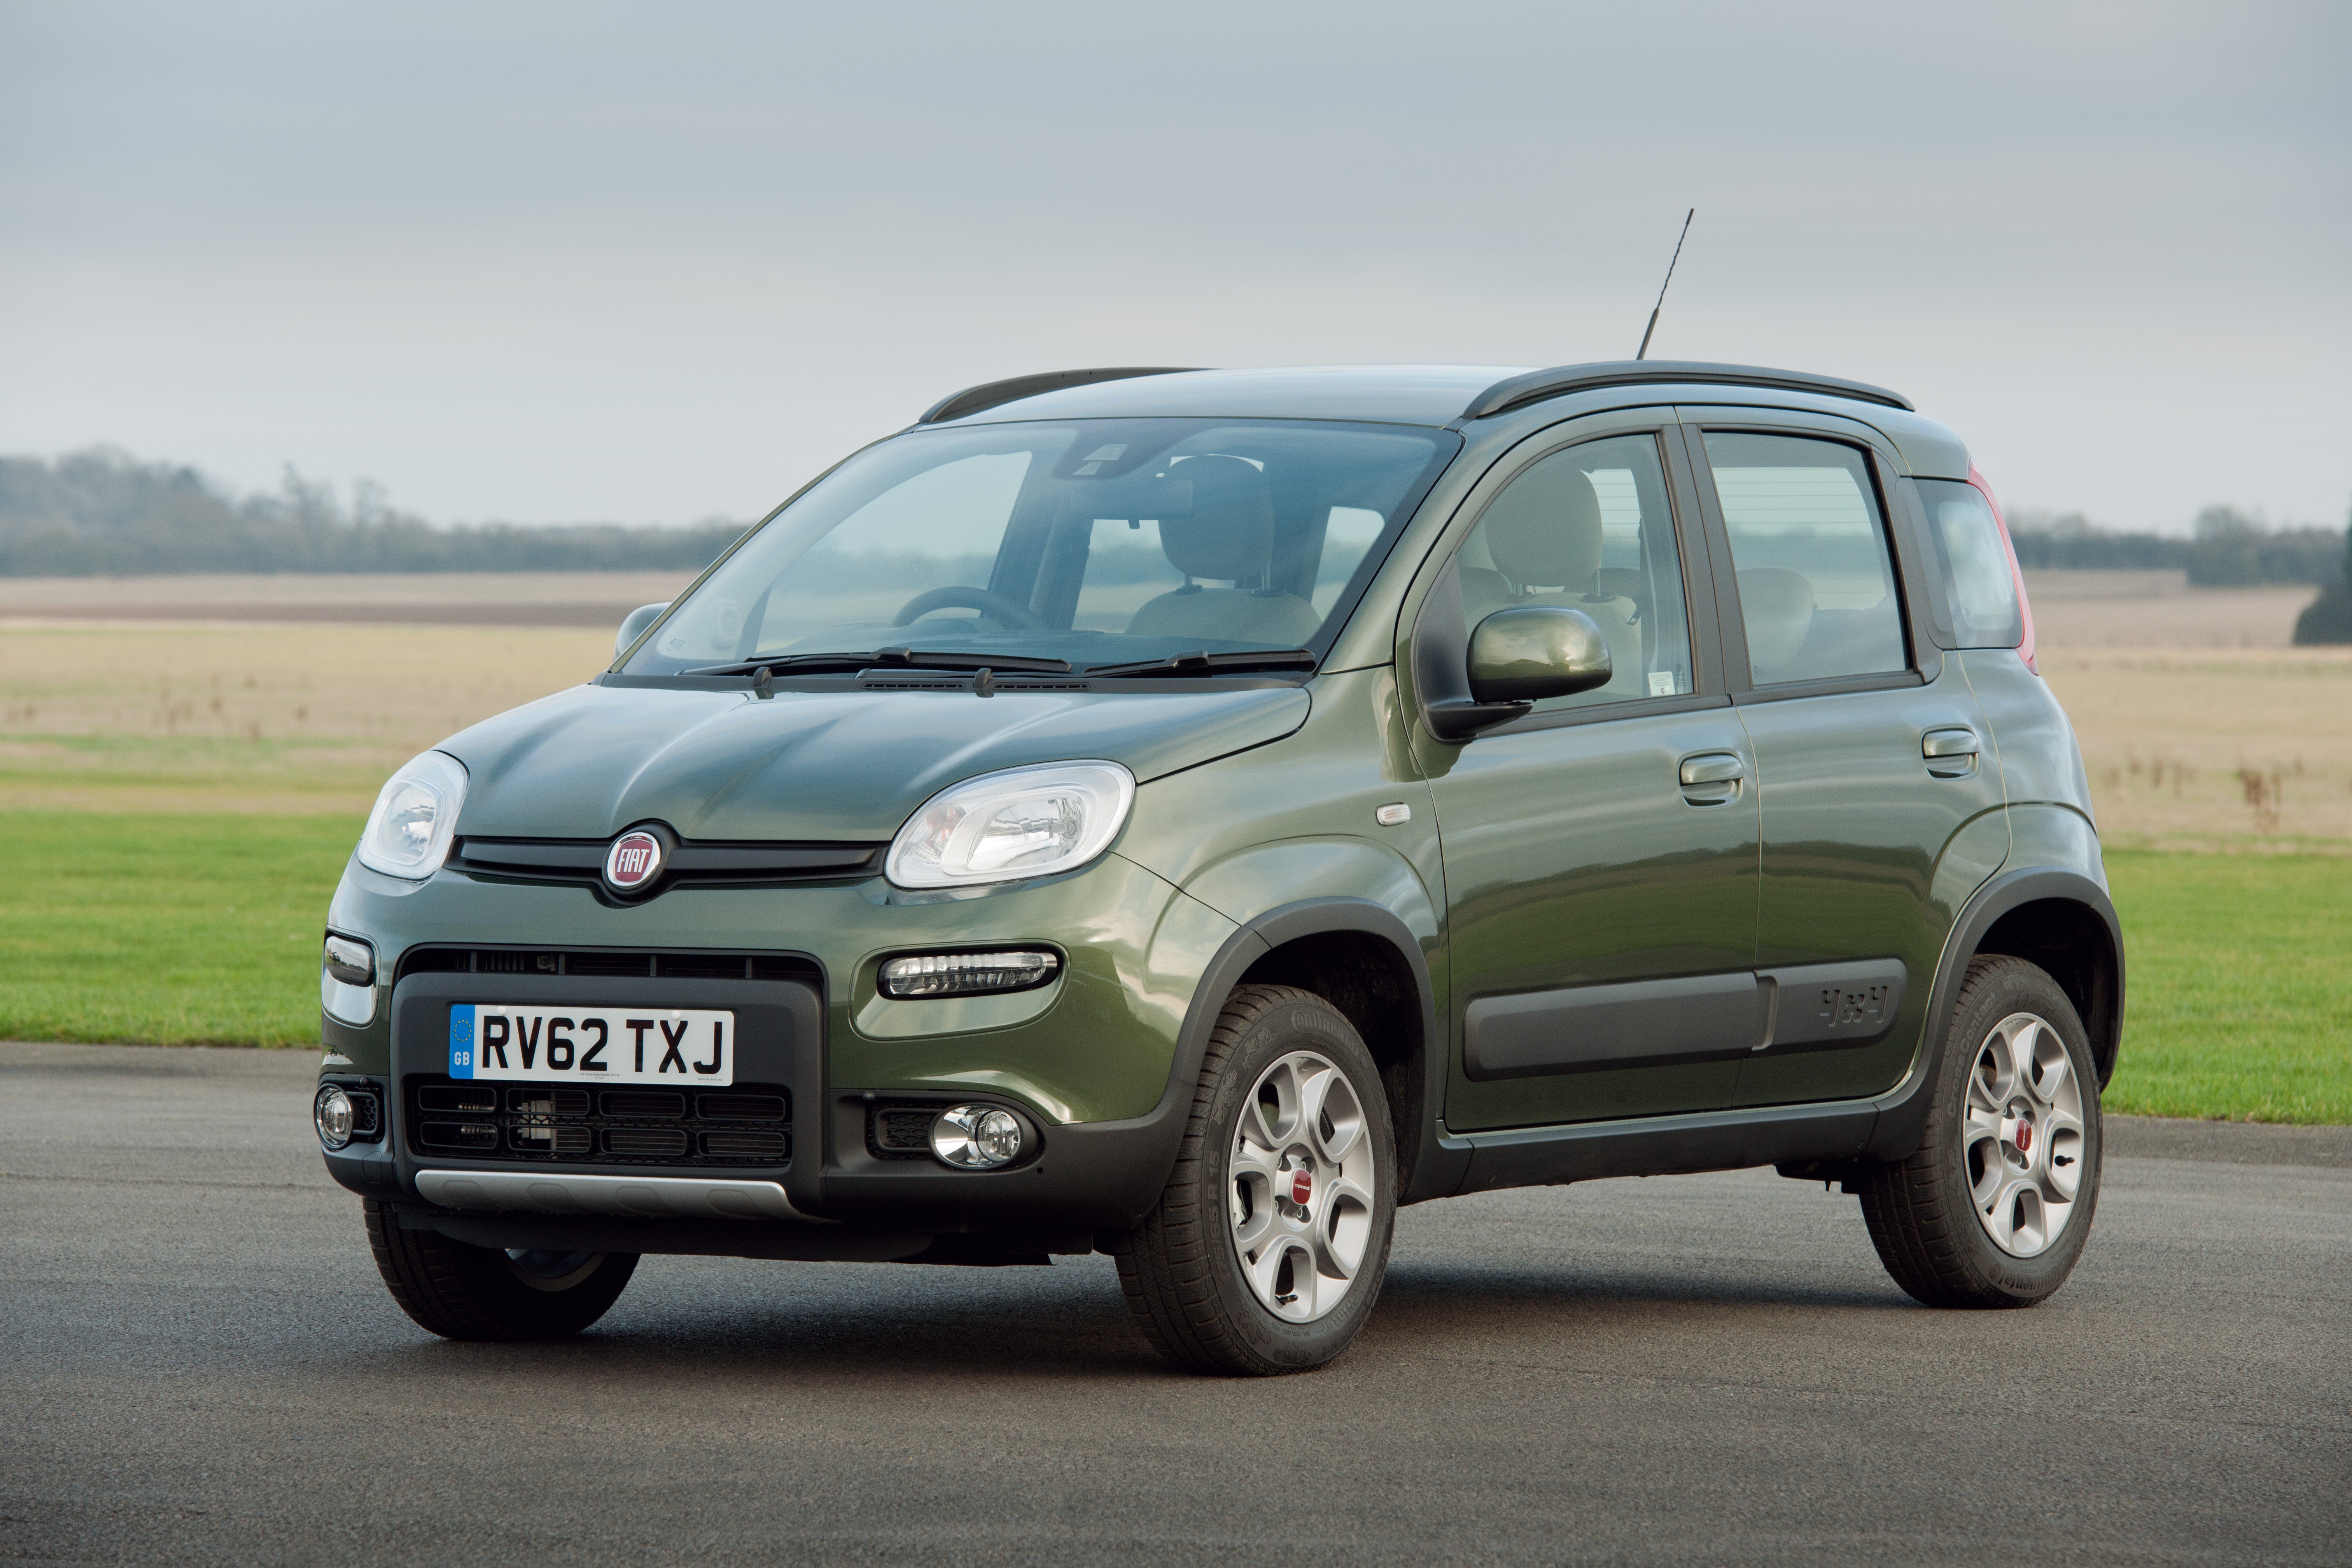 Fiat Panda with with a generous insurance allowance